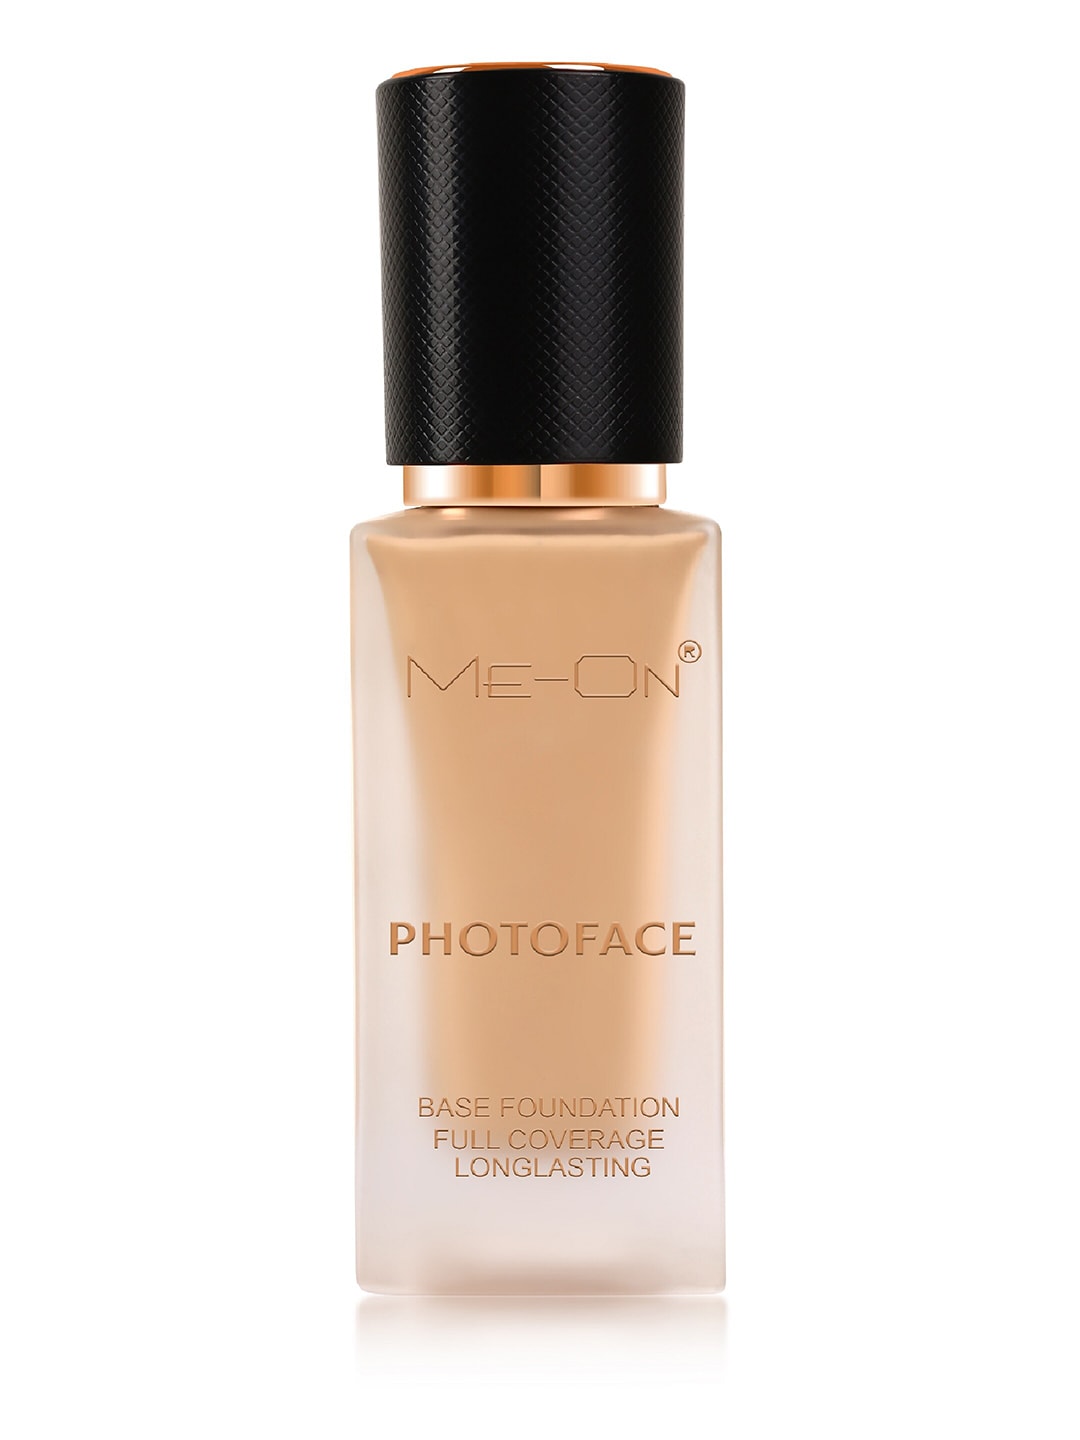 ME-ON Photoface Full Coverage Long-Lasting Base Foundation 30 ml - Shade 01 Price in India